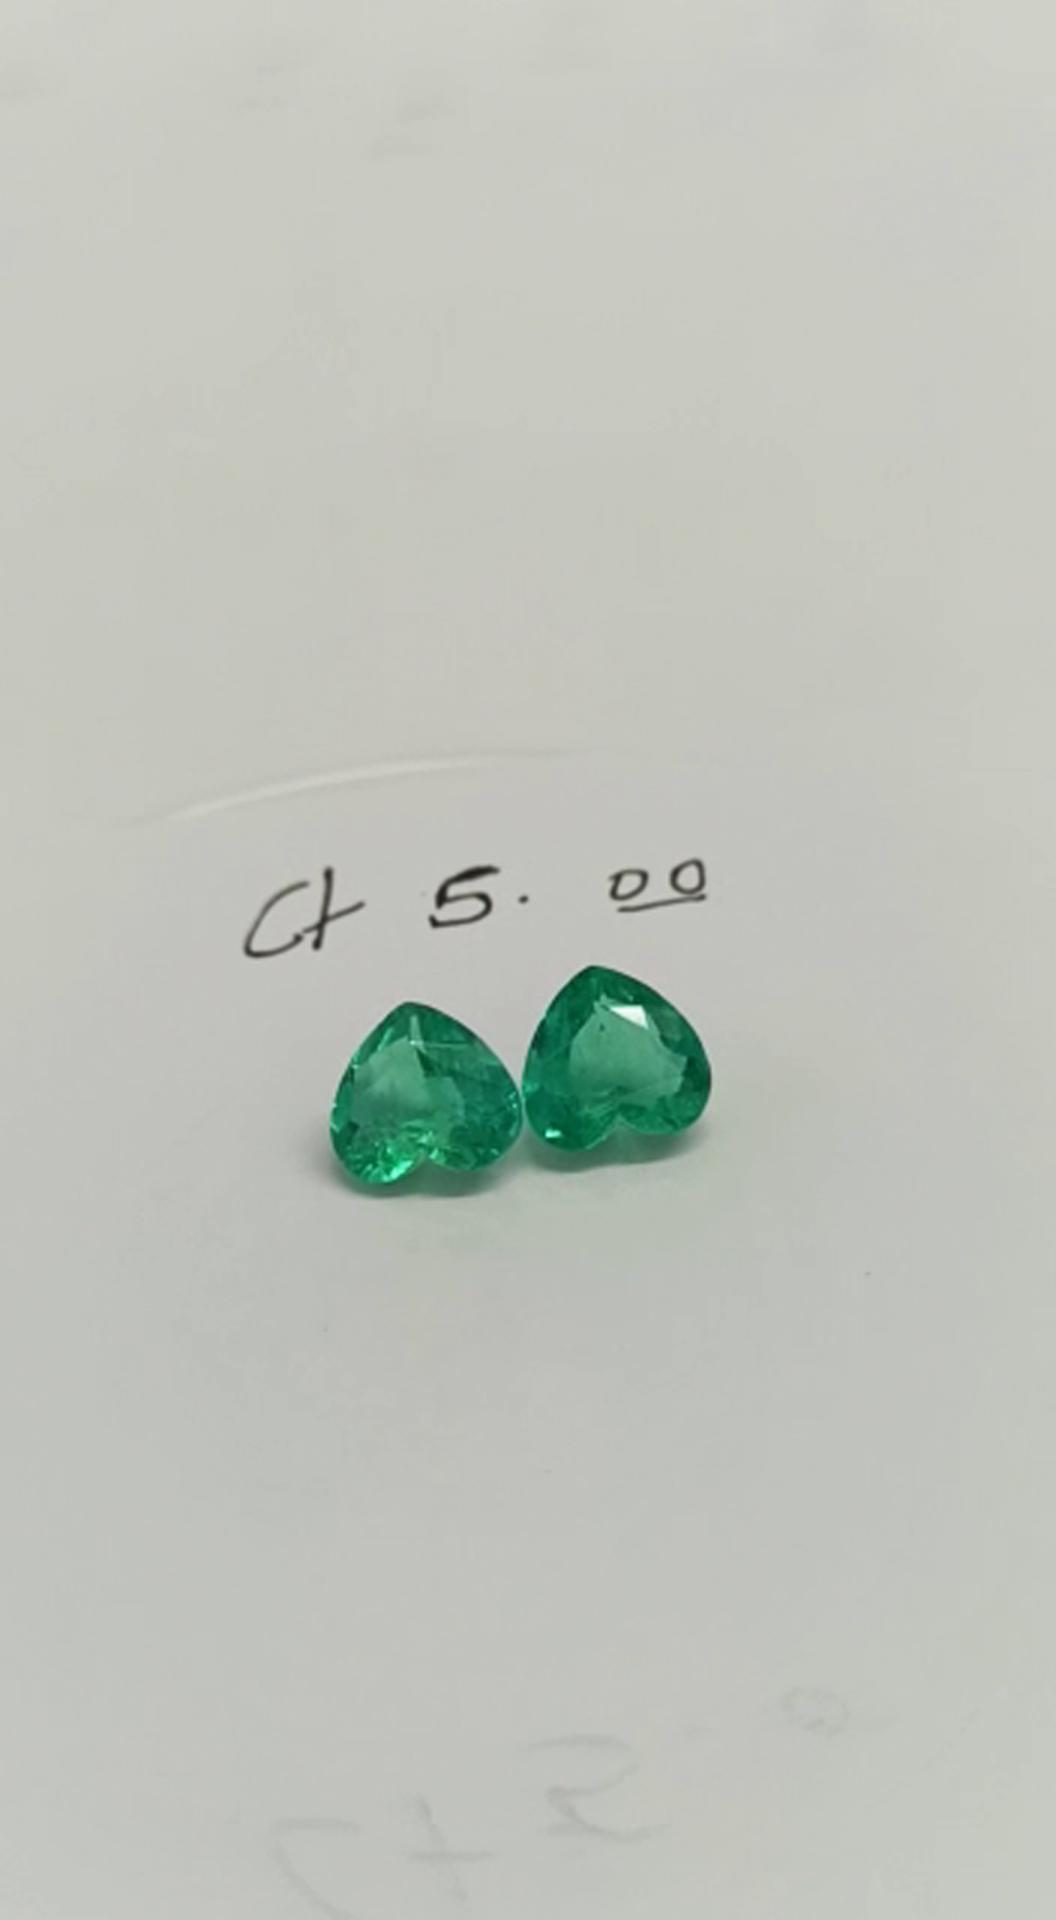 5.0 Ct. Colombian Emerald  Pair 